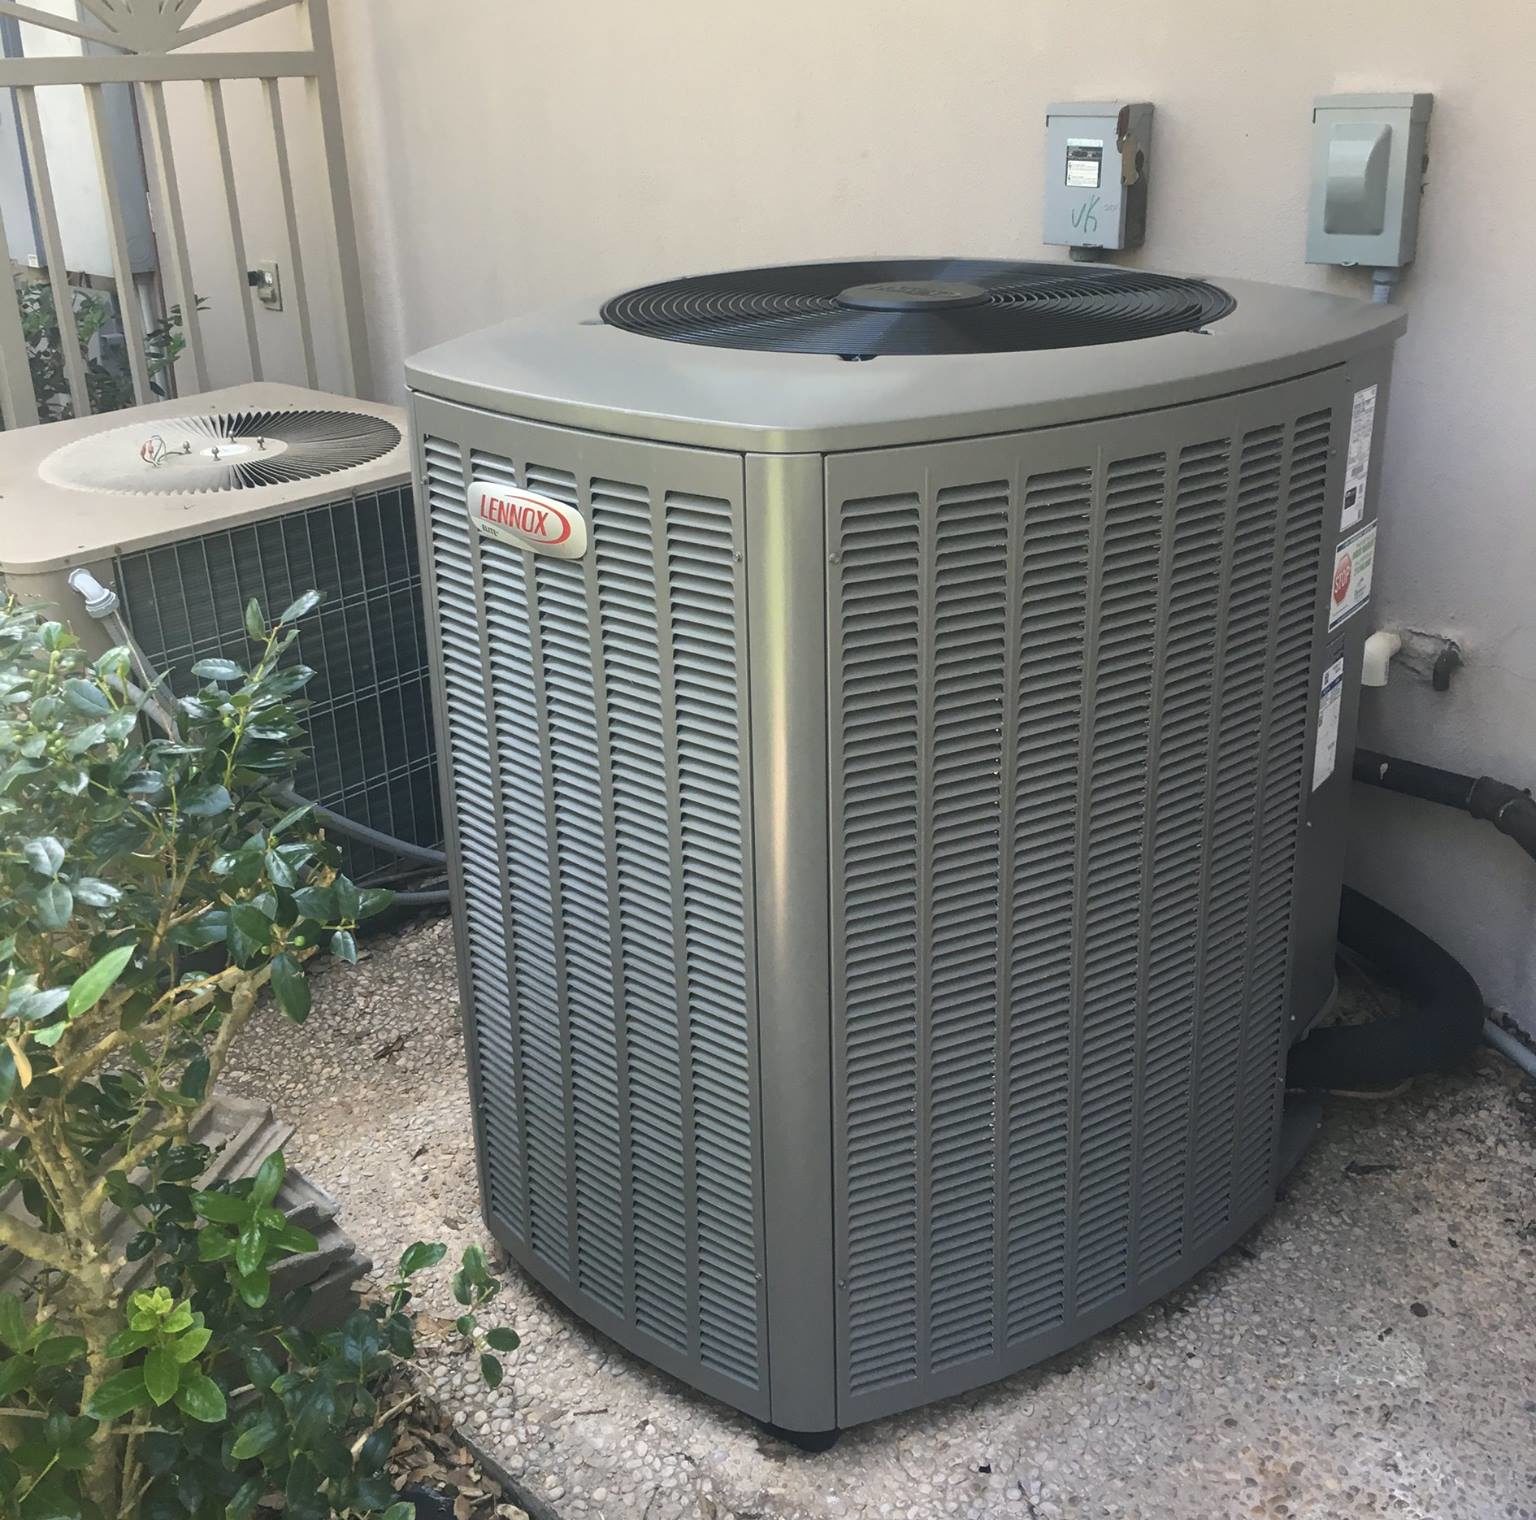 lennox air conditioning unit outside of house